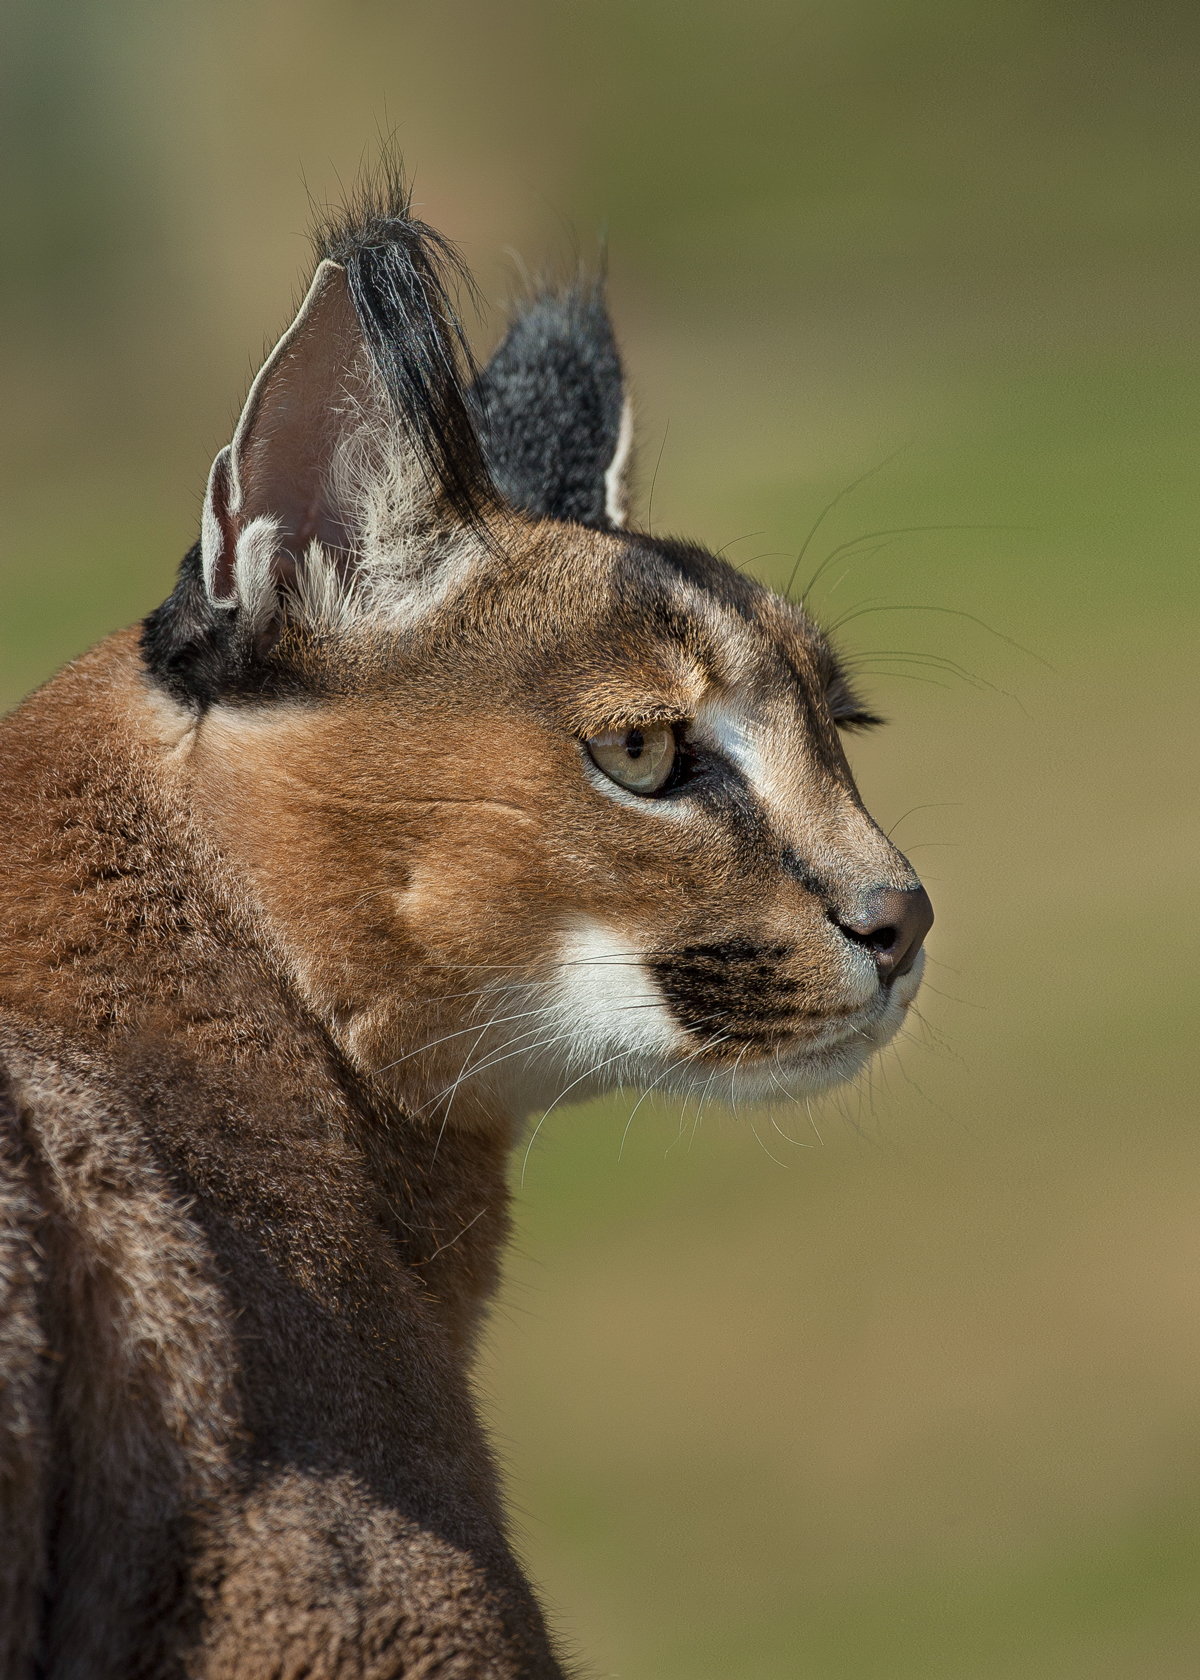 The most noticeable feature of a caracal is its black ear tufts, or tassels. Although many theories speculate their function, the most widely accepted theory is that the cat twitches its tufts to communicate with other caracals.